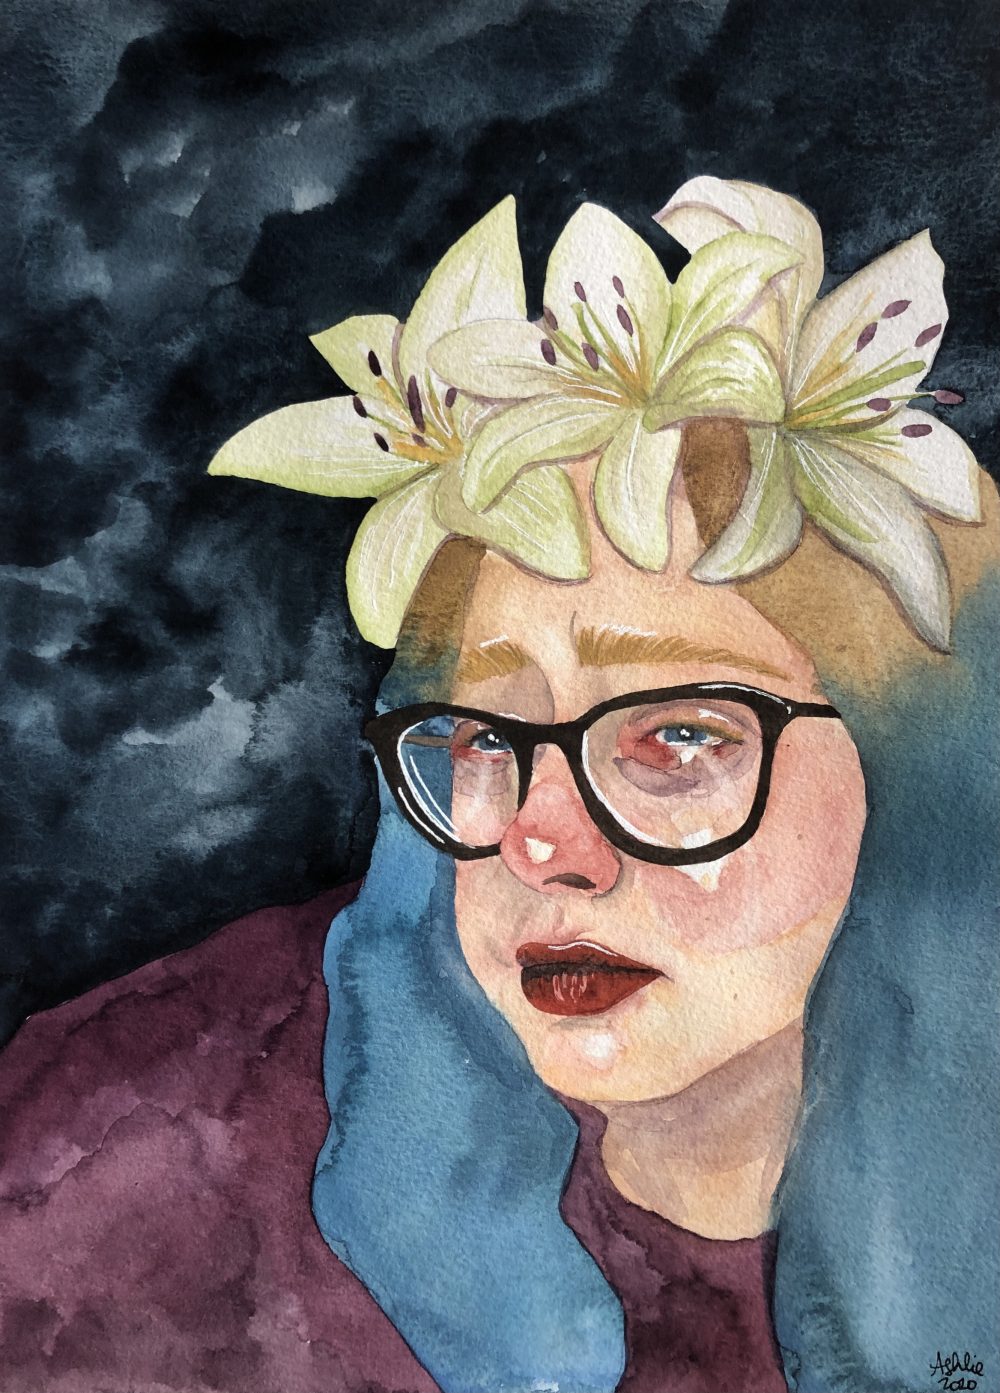 A watercolor self portrait painting of the artist: a white woman with blonde and blue hair, white lilies sit atop her head, she is crying, tears streaming down her face, she is wearing a maroon sweater and the background is dark grey.